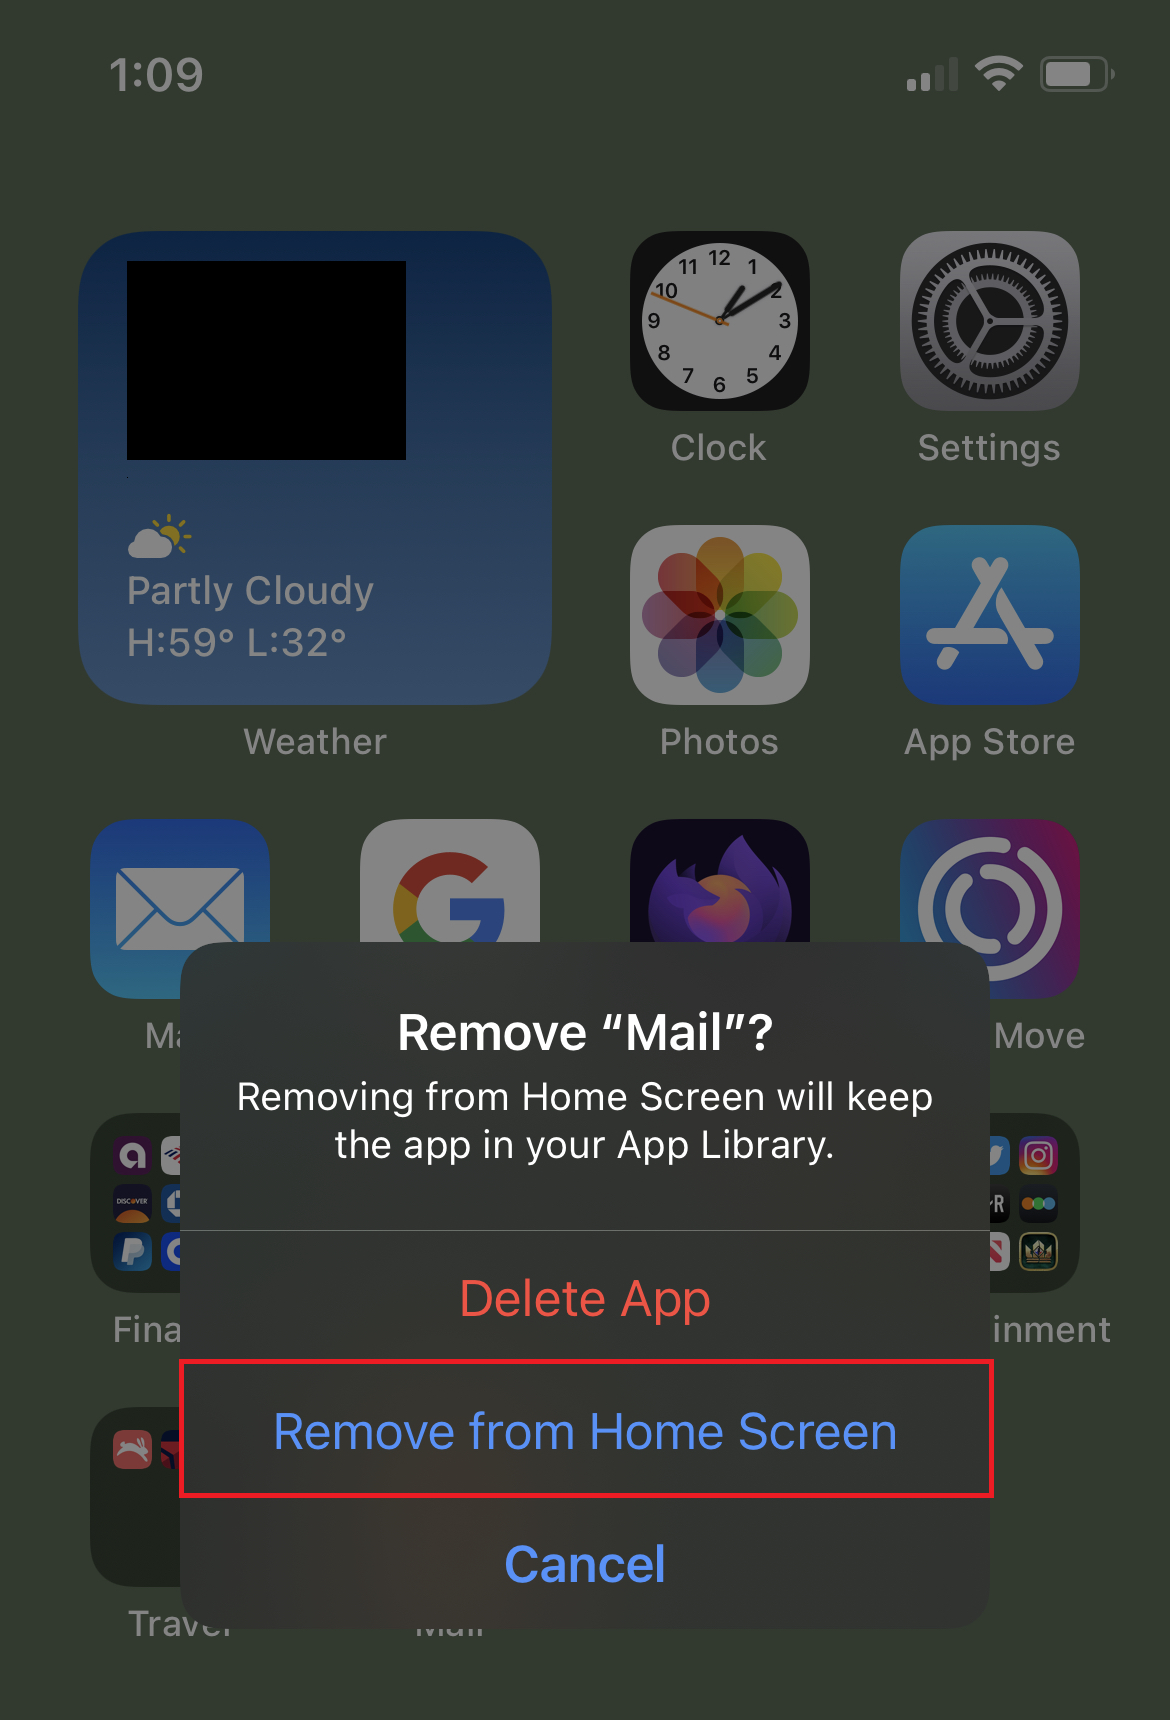 Remove from Home Screen Menu